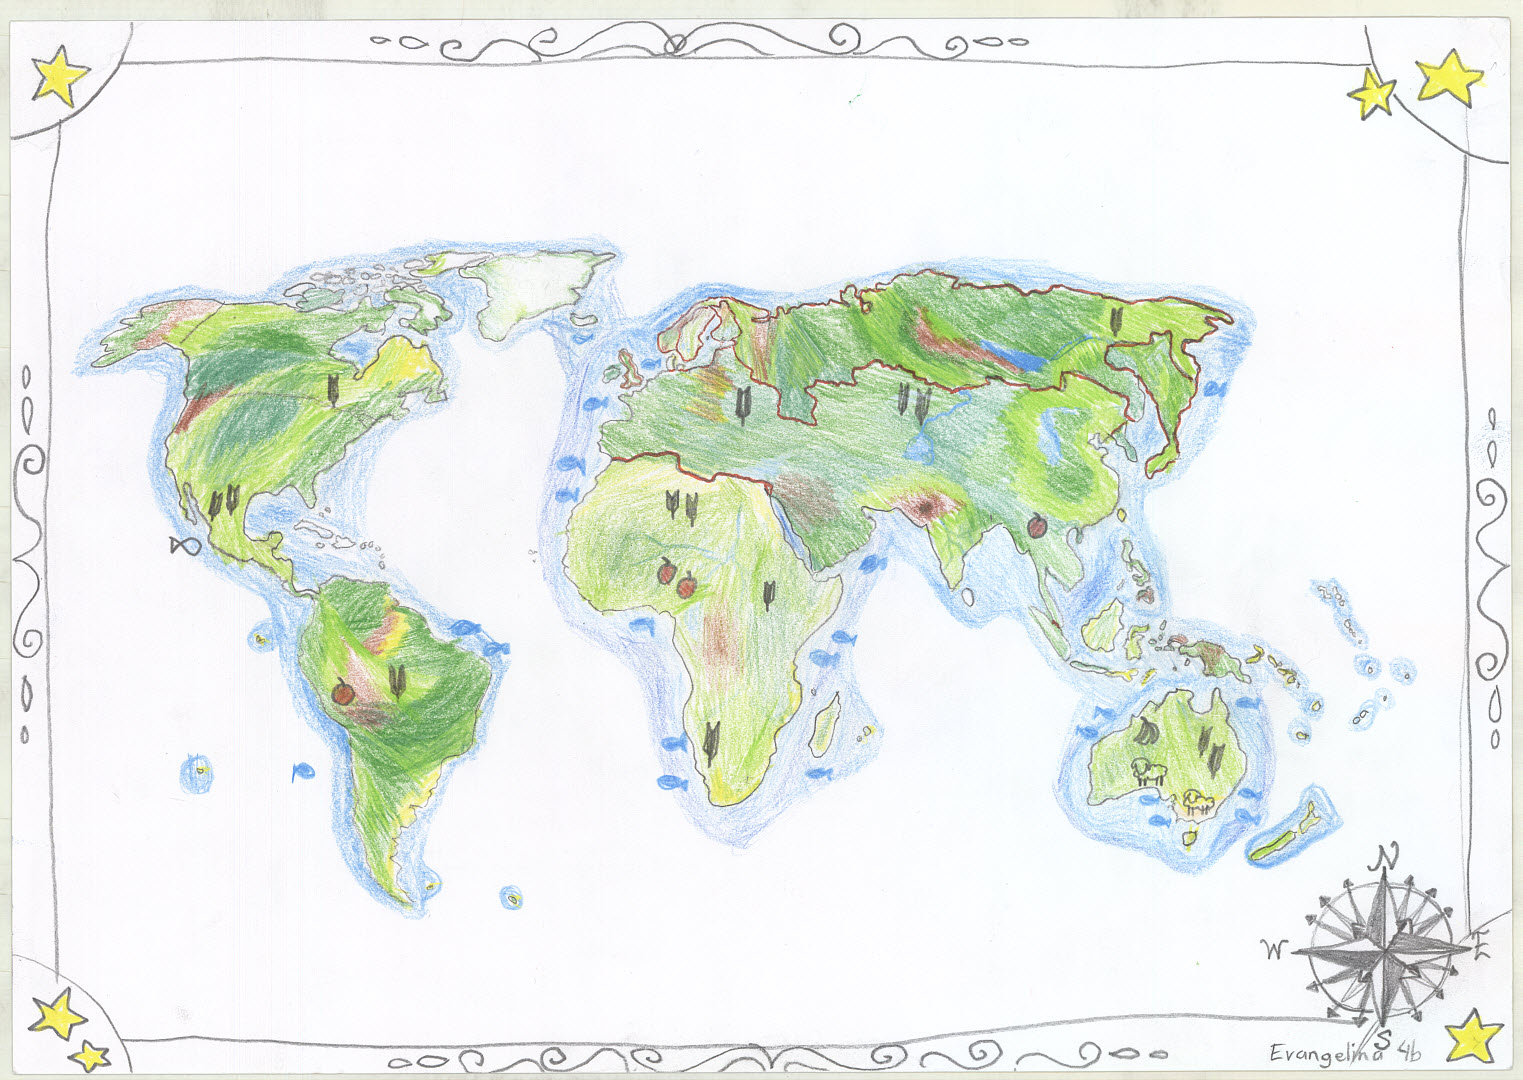 Shows all of the continents, coloured, with greenery, wildlife and stars